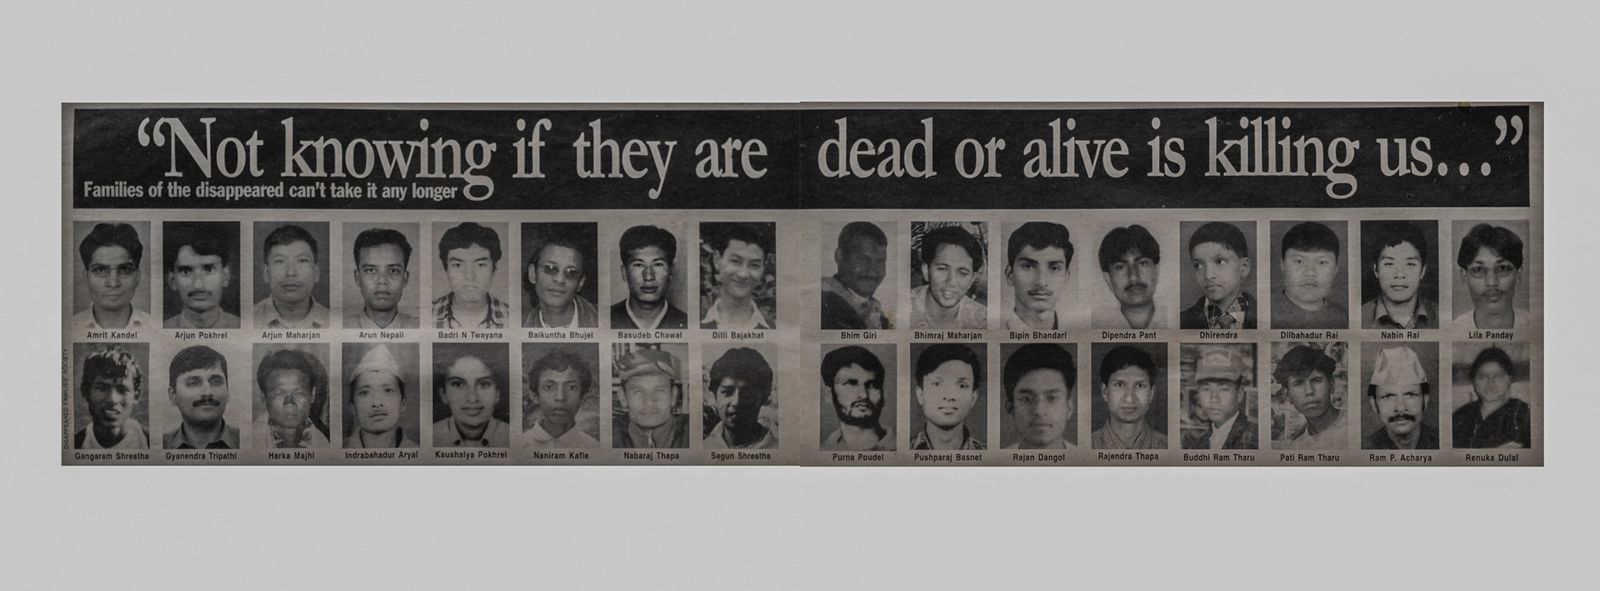 © Stephen Dock - A newspaper clipping showing the faces of dozens of missing people.